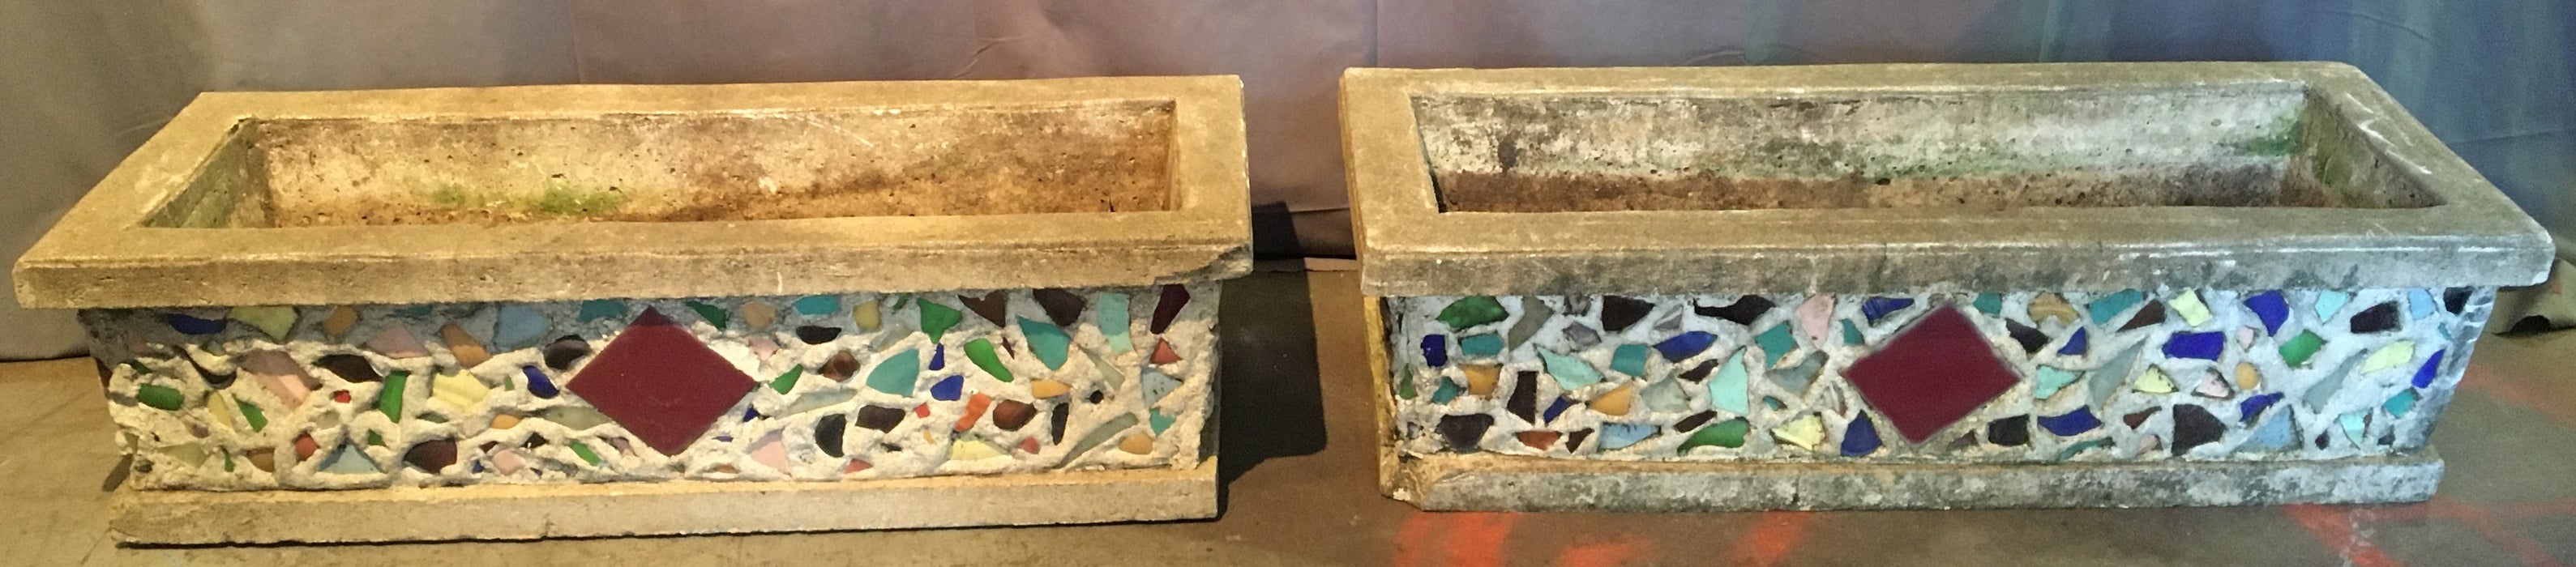 PAIR OF LONG CONCRETE PLANTERS WITH MOSAIC ORNAMENTATION